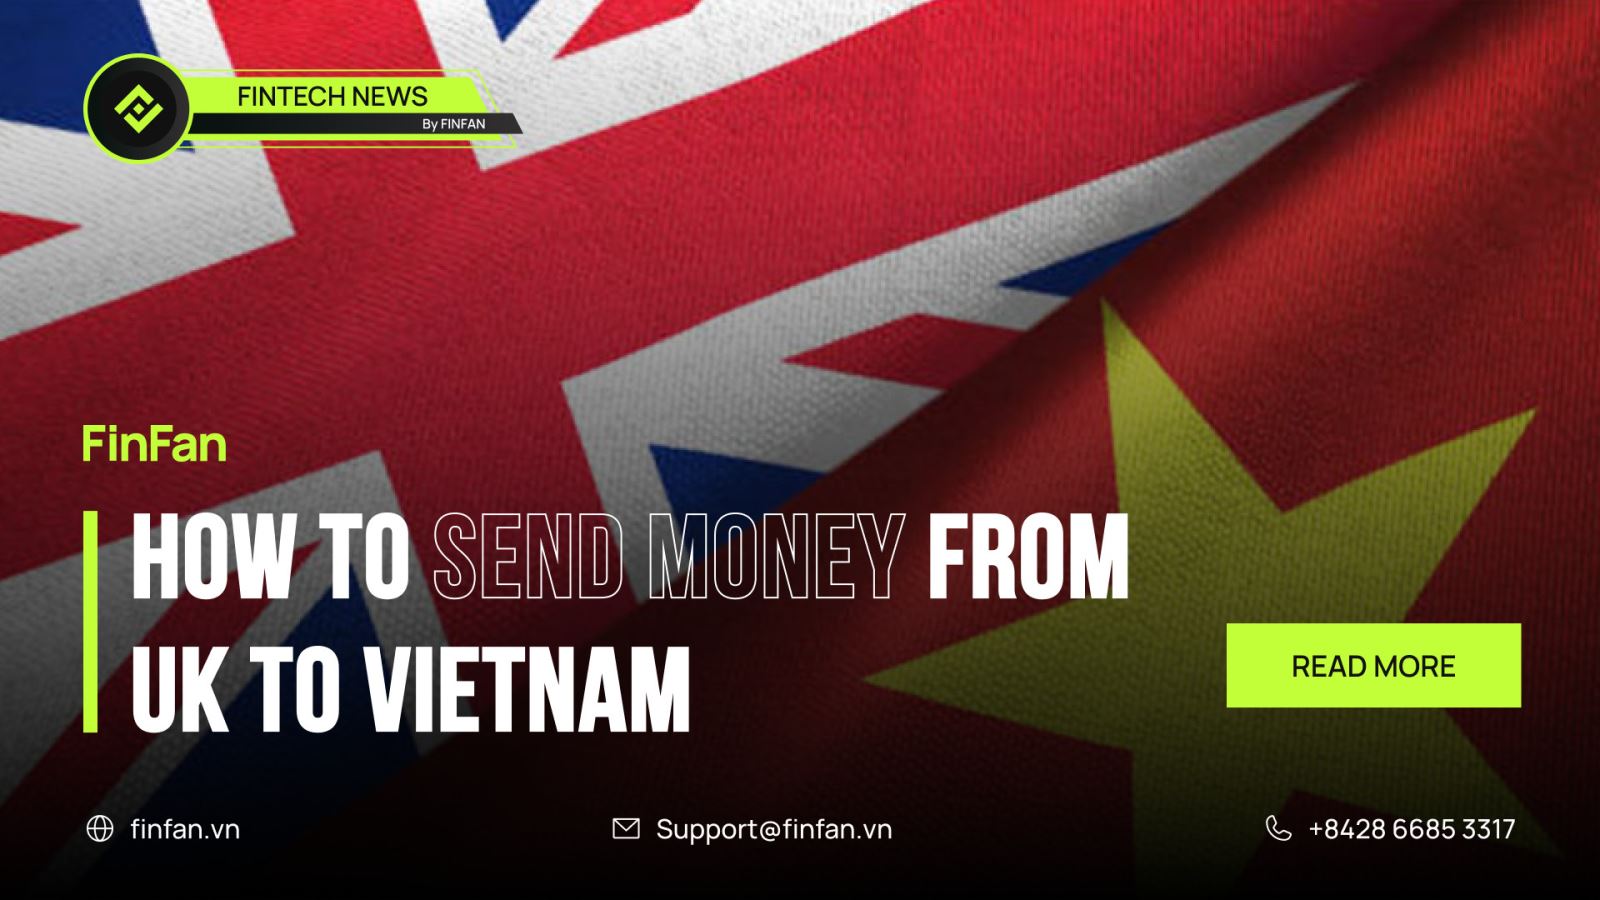 How to send money from the UK to Vietnam?